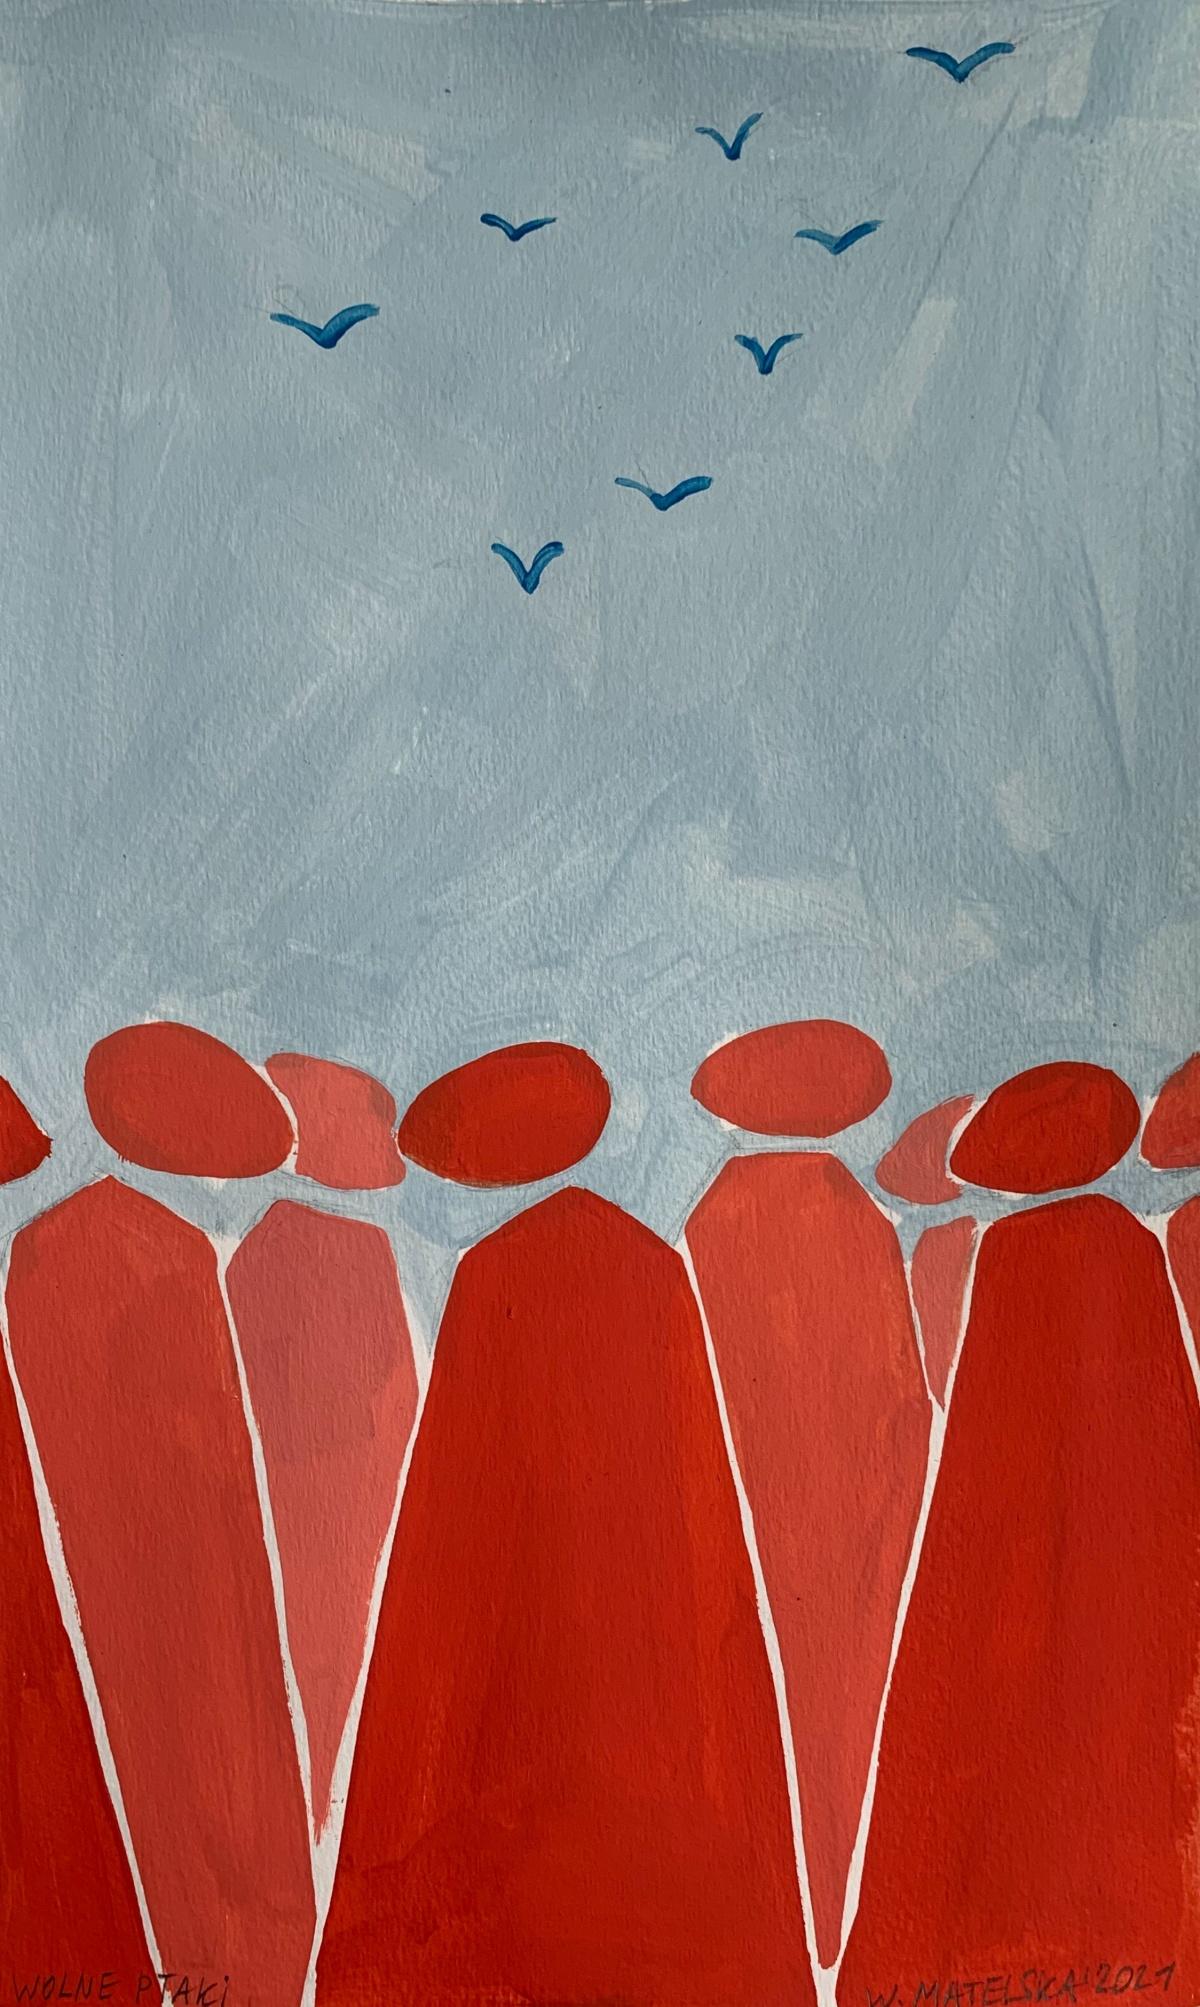 Figurative acrylic on paper painting by young professional European artist Waleria Matelska. Artwork is minimalistic and composed with synthetic shapes. Painting is vibrant- main colors are blue and red. There are many figures with birds above